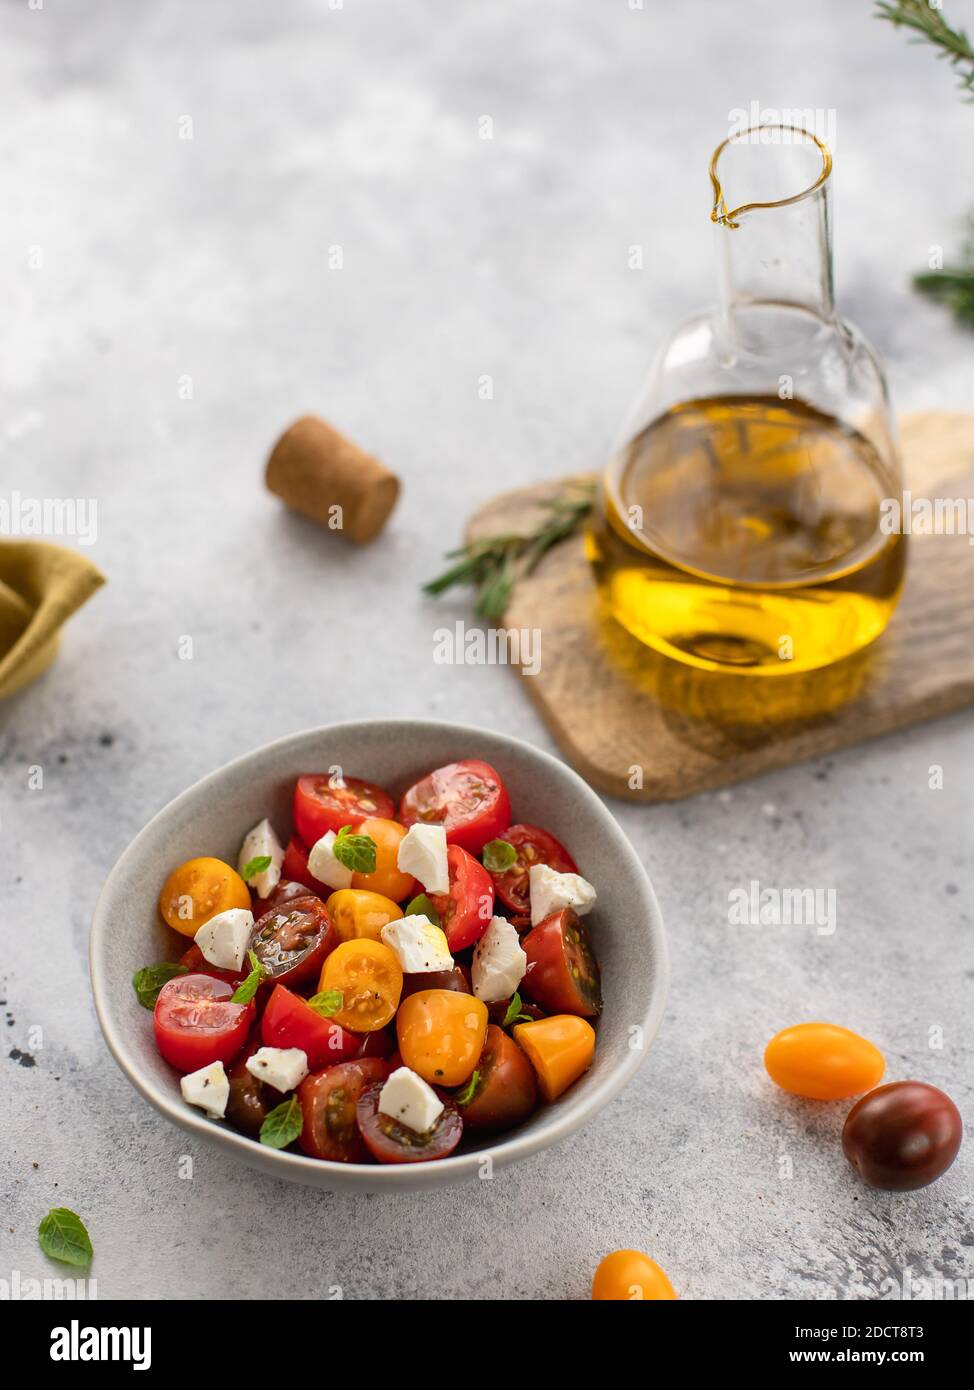 salad with fresh tomatoes, feta cheese, basil, olive oil. vegitarian healthy concept. gray background, copy space, vertical image Stock Photo